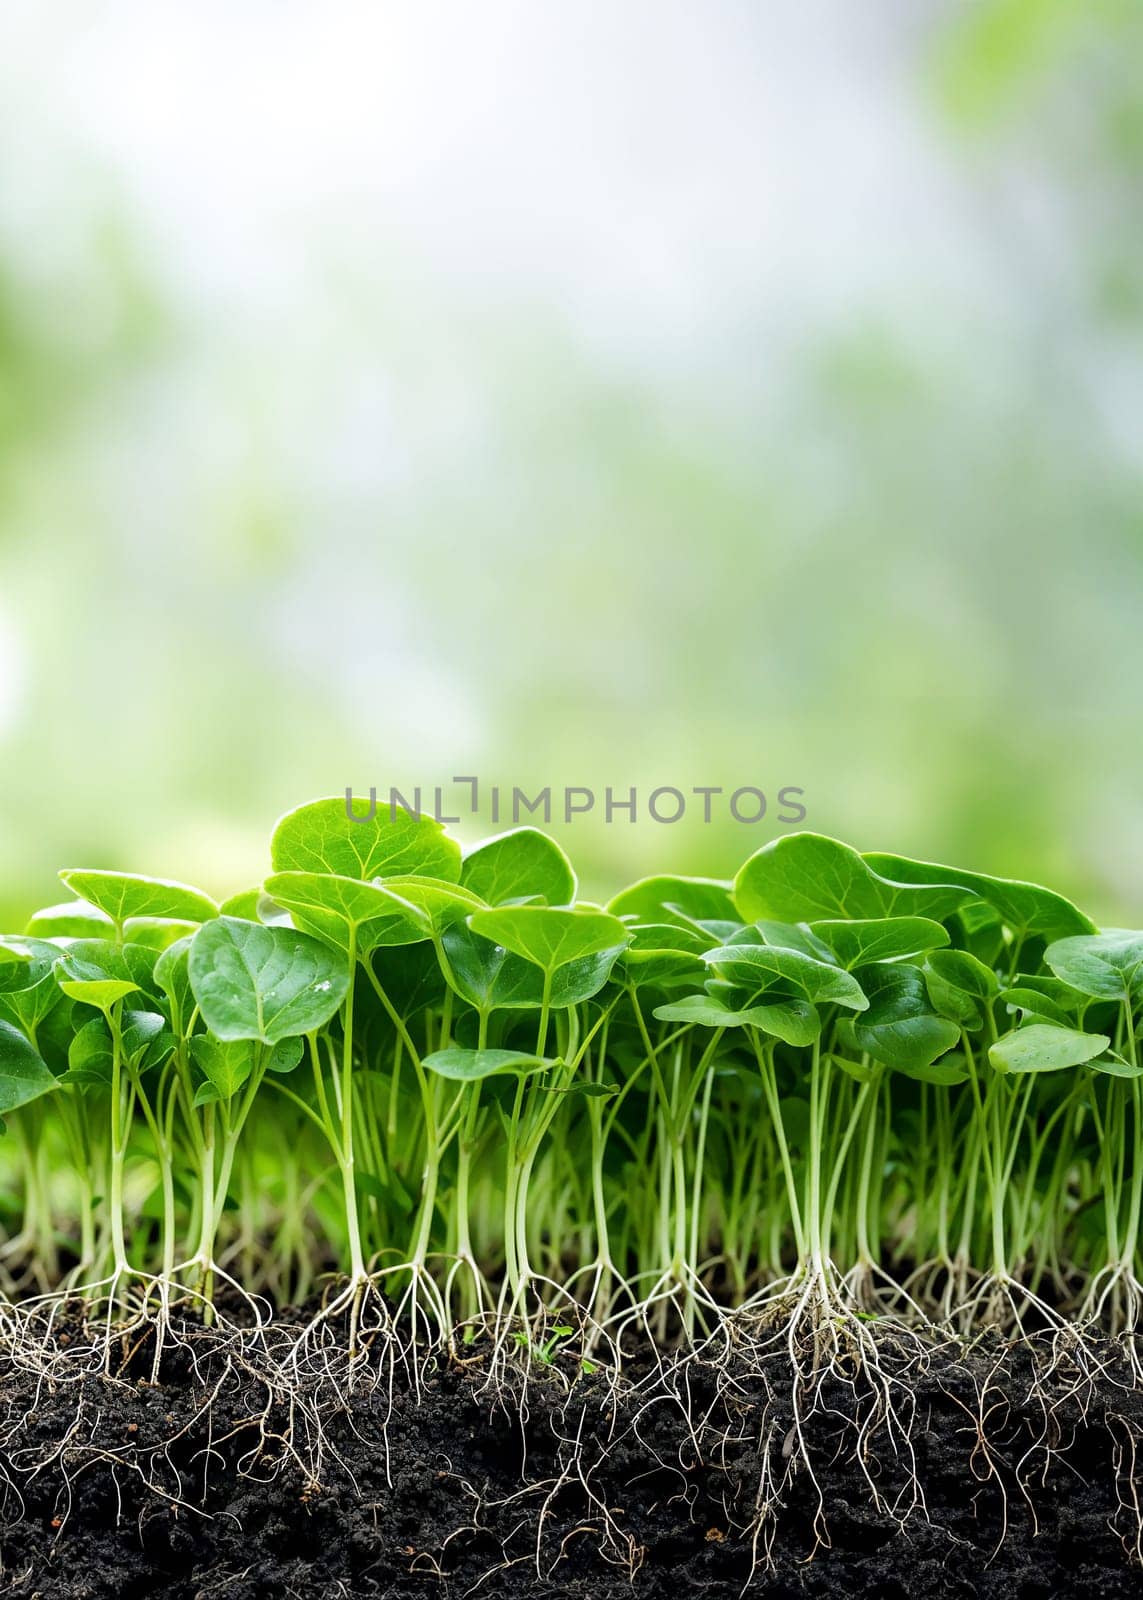 A closeup of a row of green sprouts growing from the ground, showcasing roots and leaves emerging from rich soil.